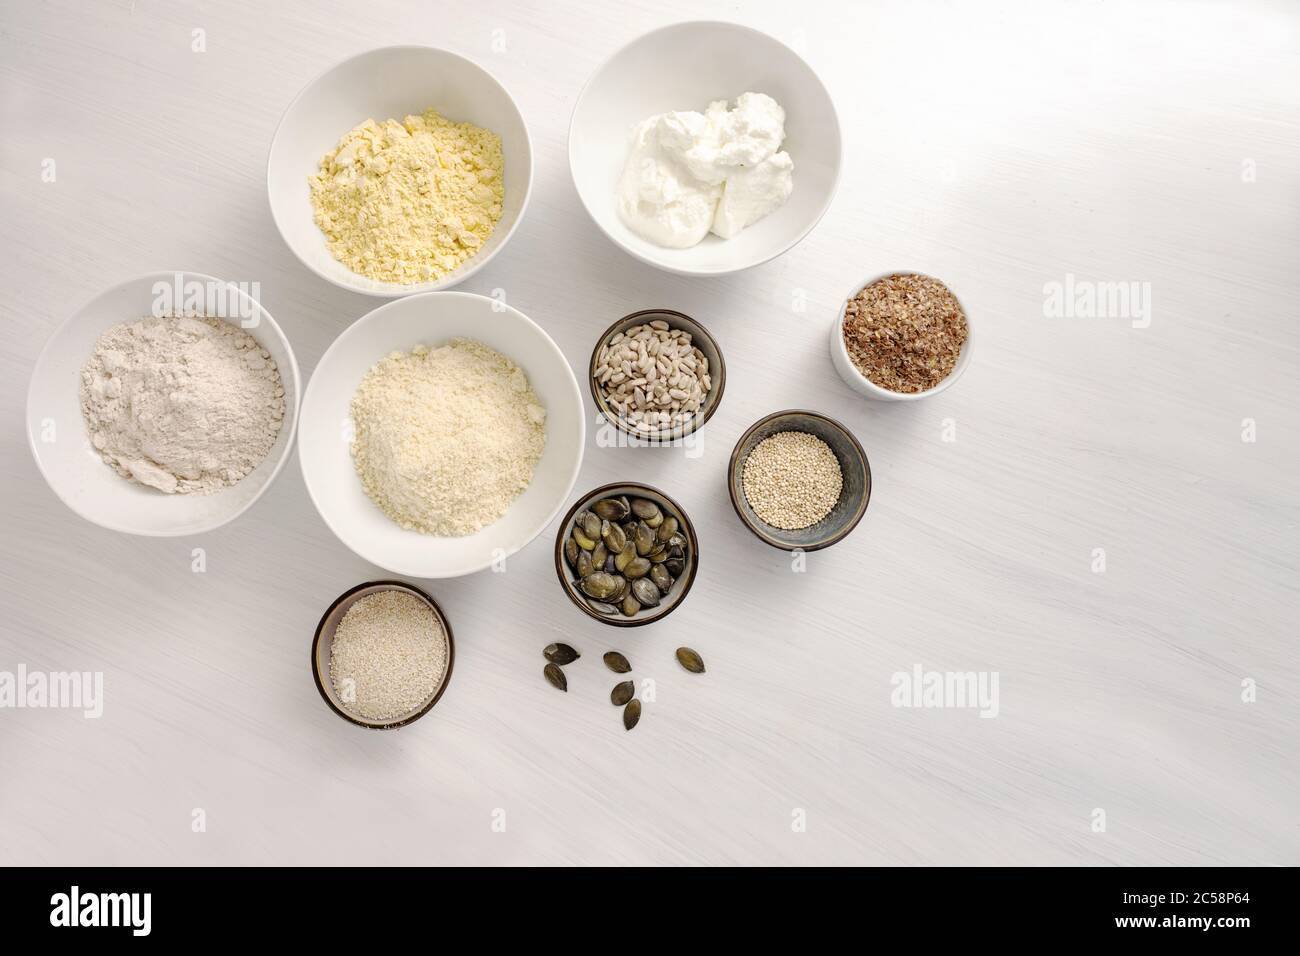 Baking ingredients for a healthy low carb protein bread with quark, oat bran, almond flour and various seeds on a white table, high angle view from ab Stock Photo